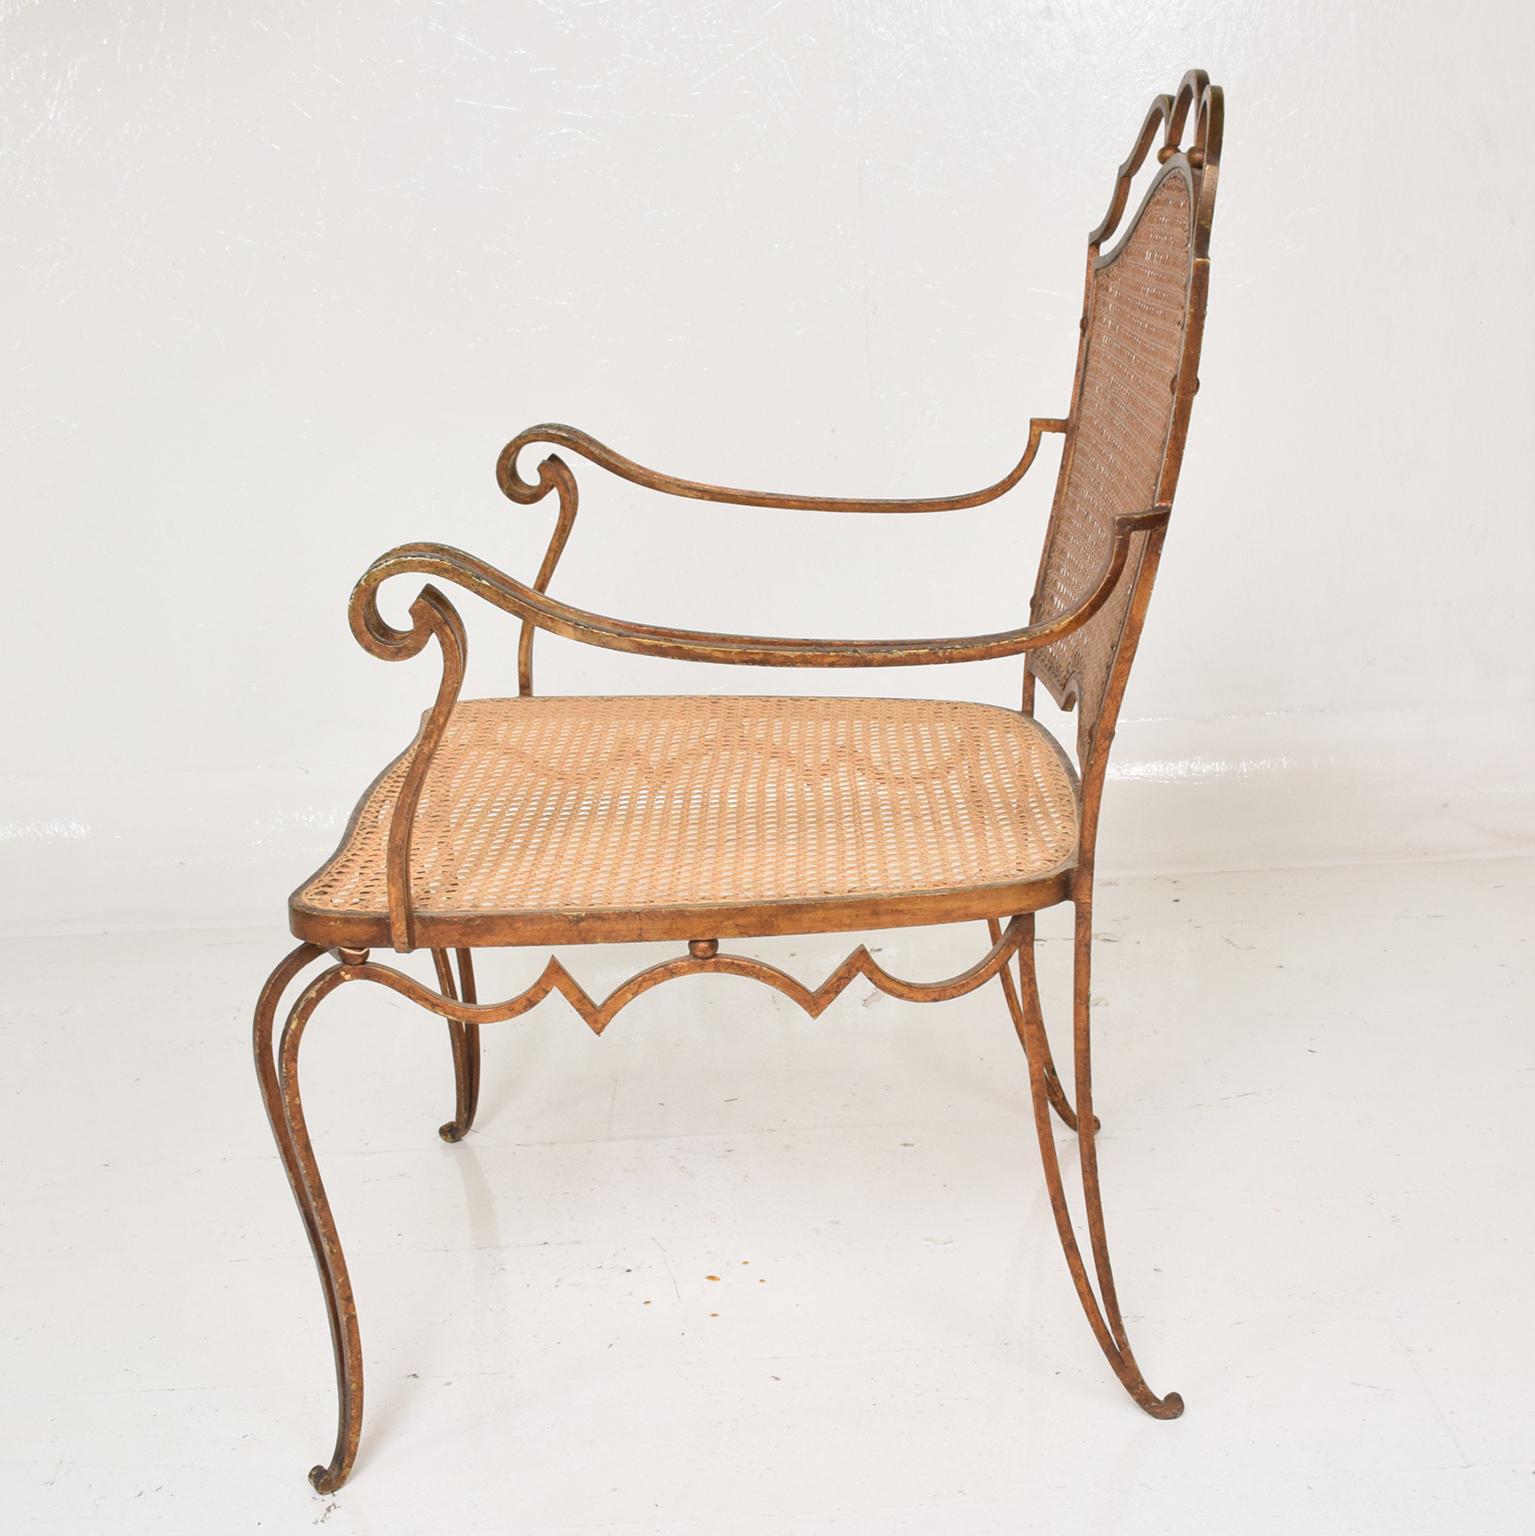 Mid-20th Century Fanciful Regency Armchair by Arturo Pani in Forged Gilt Iron & Woven Cane 1940s